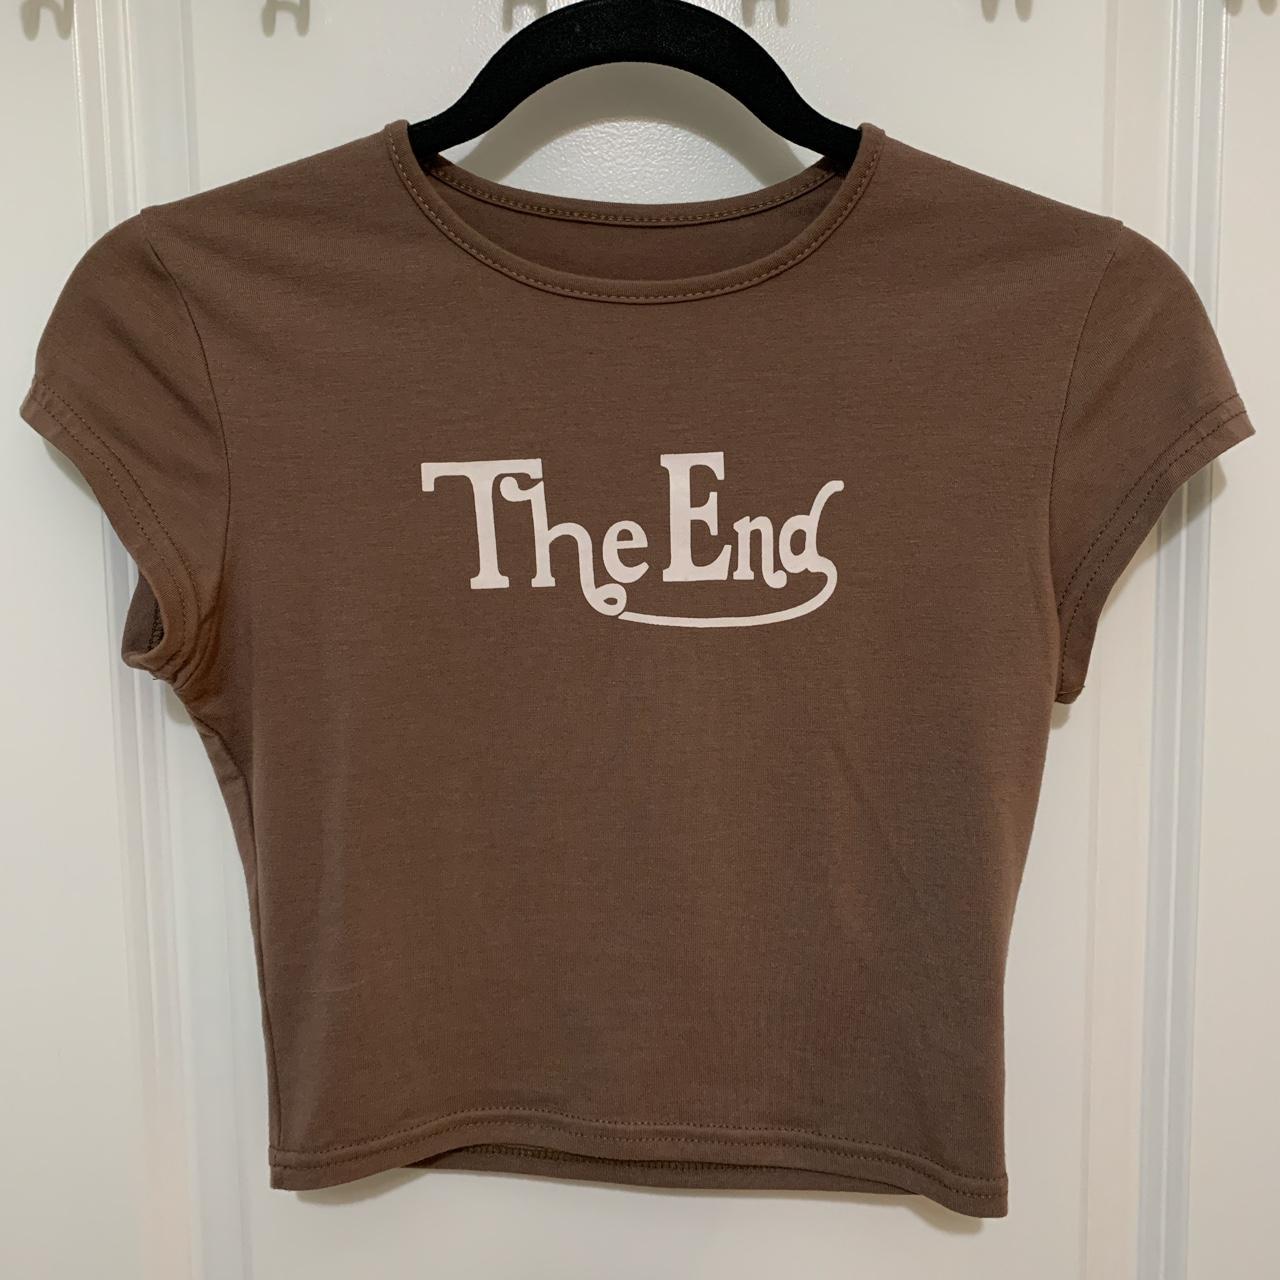 S/M princess polly “the end” brown baby tee (second... - Depop